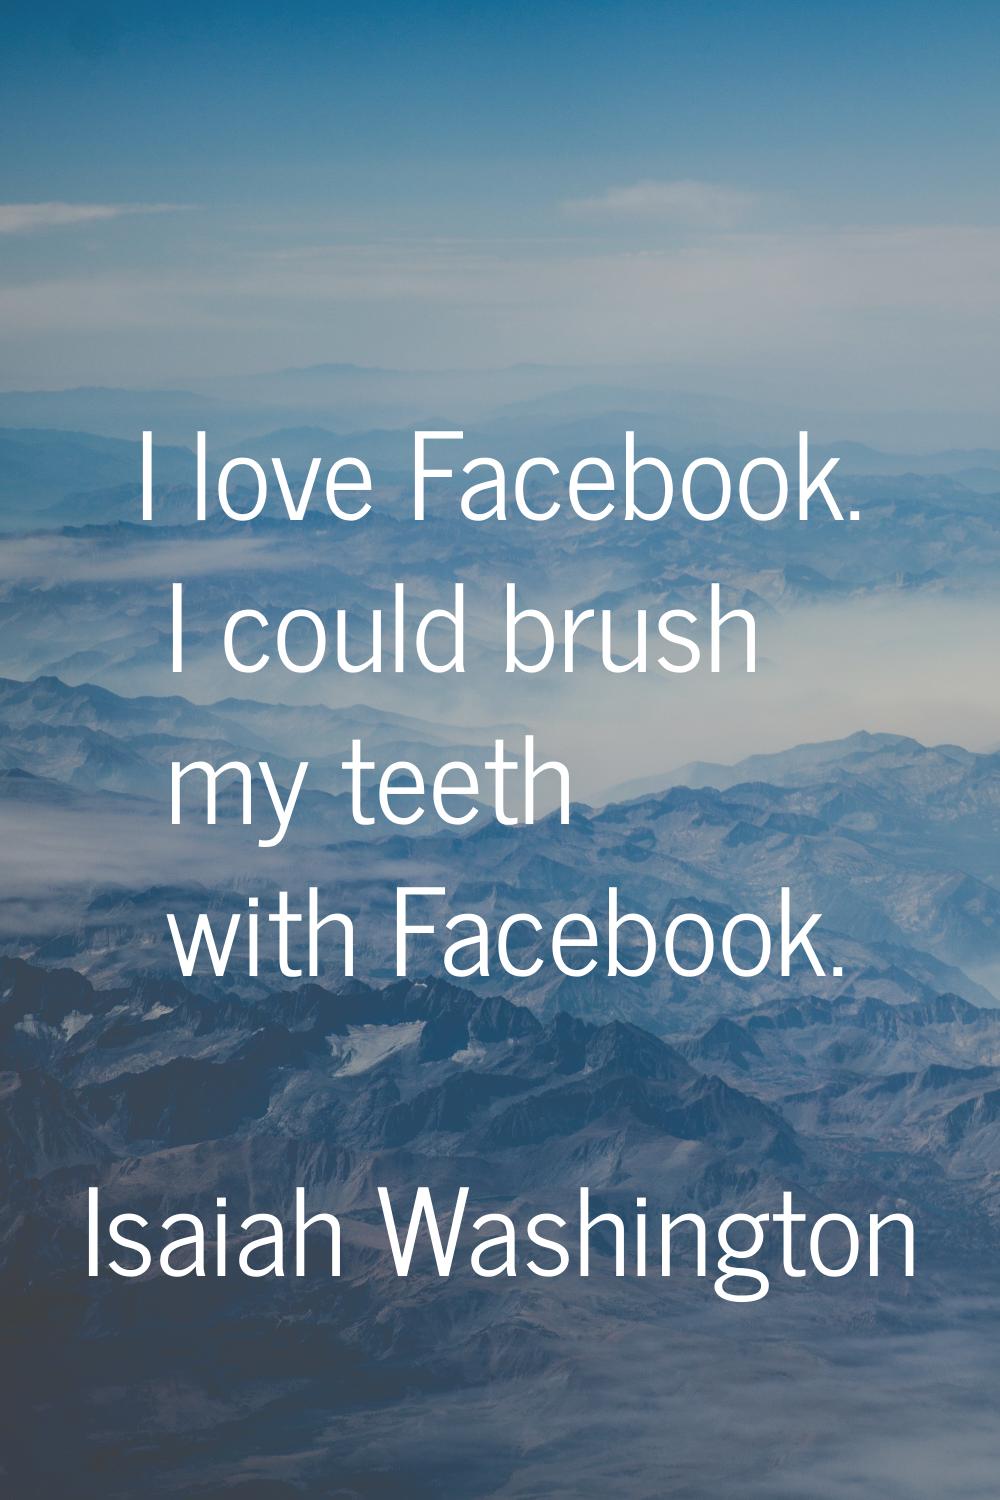 I love Facebook. I could brush my teeth with Facebook.